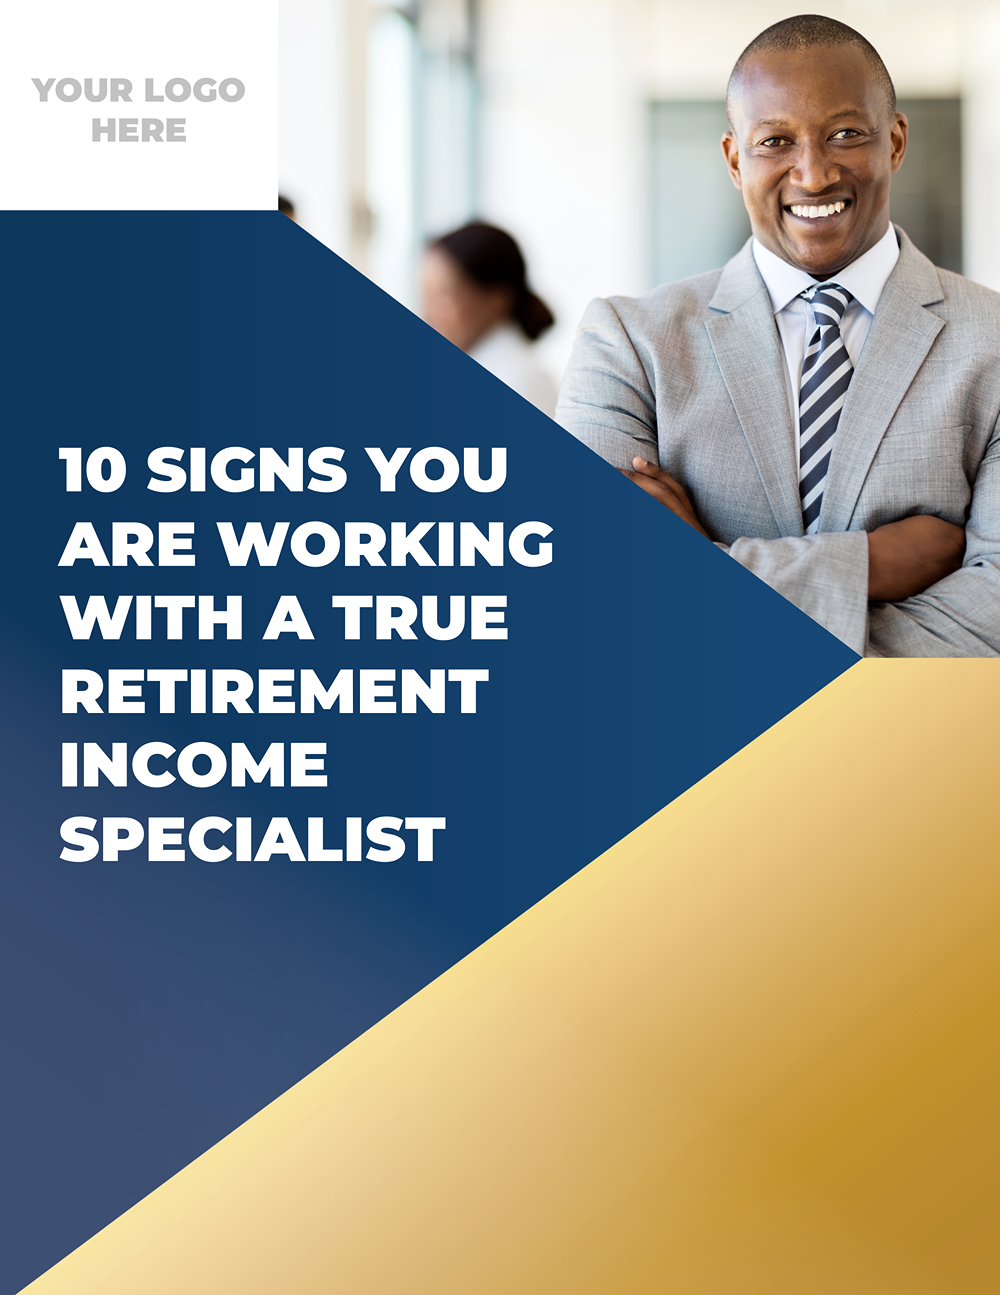 10 Signs You Are Working with a True Retirement Income Specialist